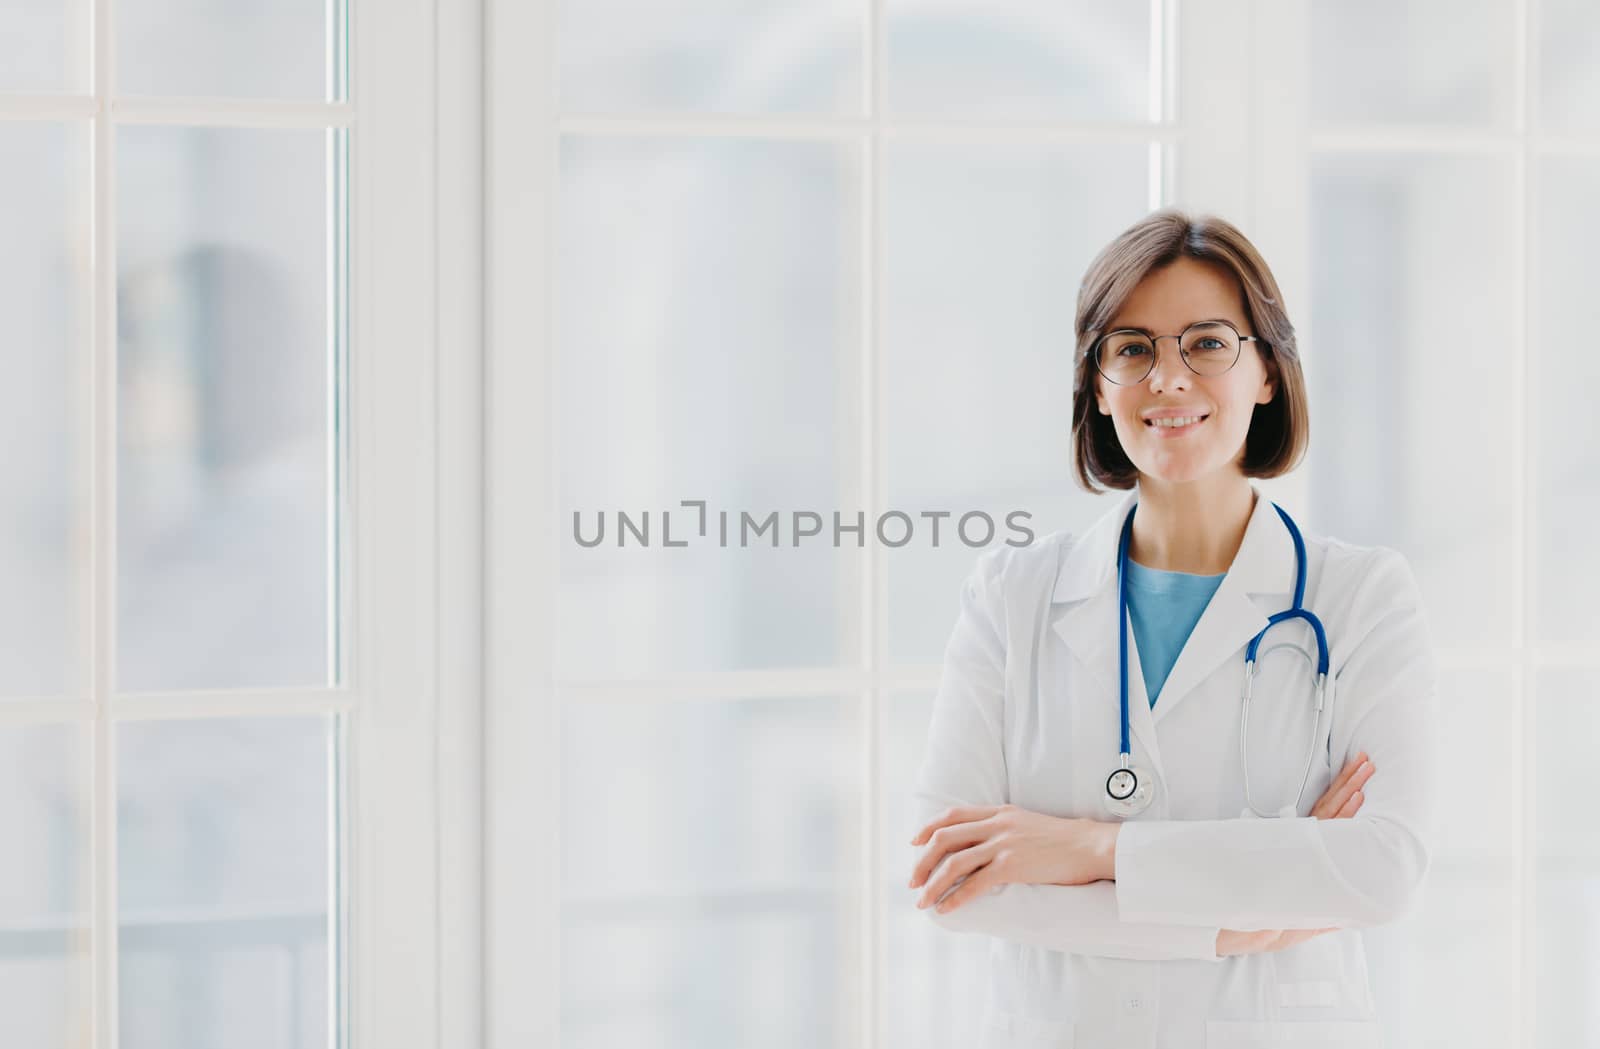 Self confident professional doctor stands with arms crossed, wears white medical gown with stethoscope, thinks about work positively, poses against big window. Healthcare and occupation concept